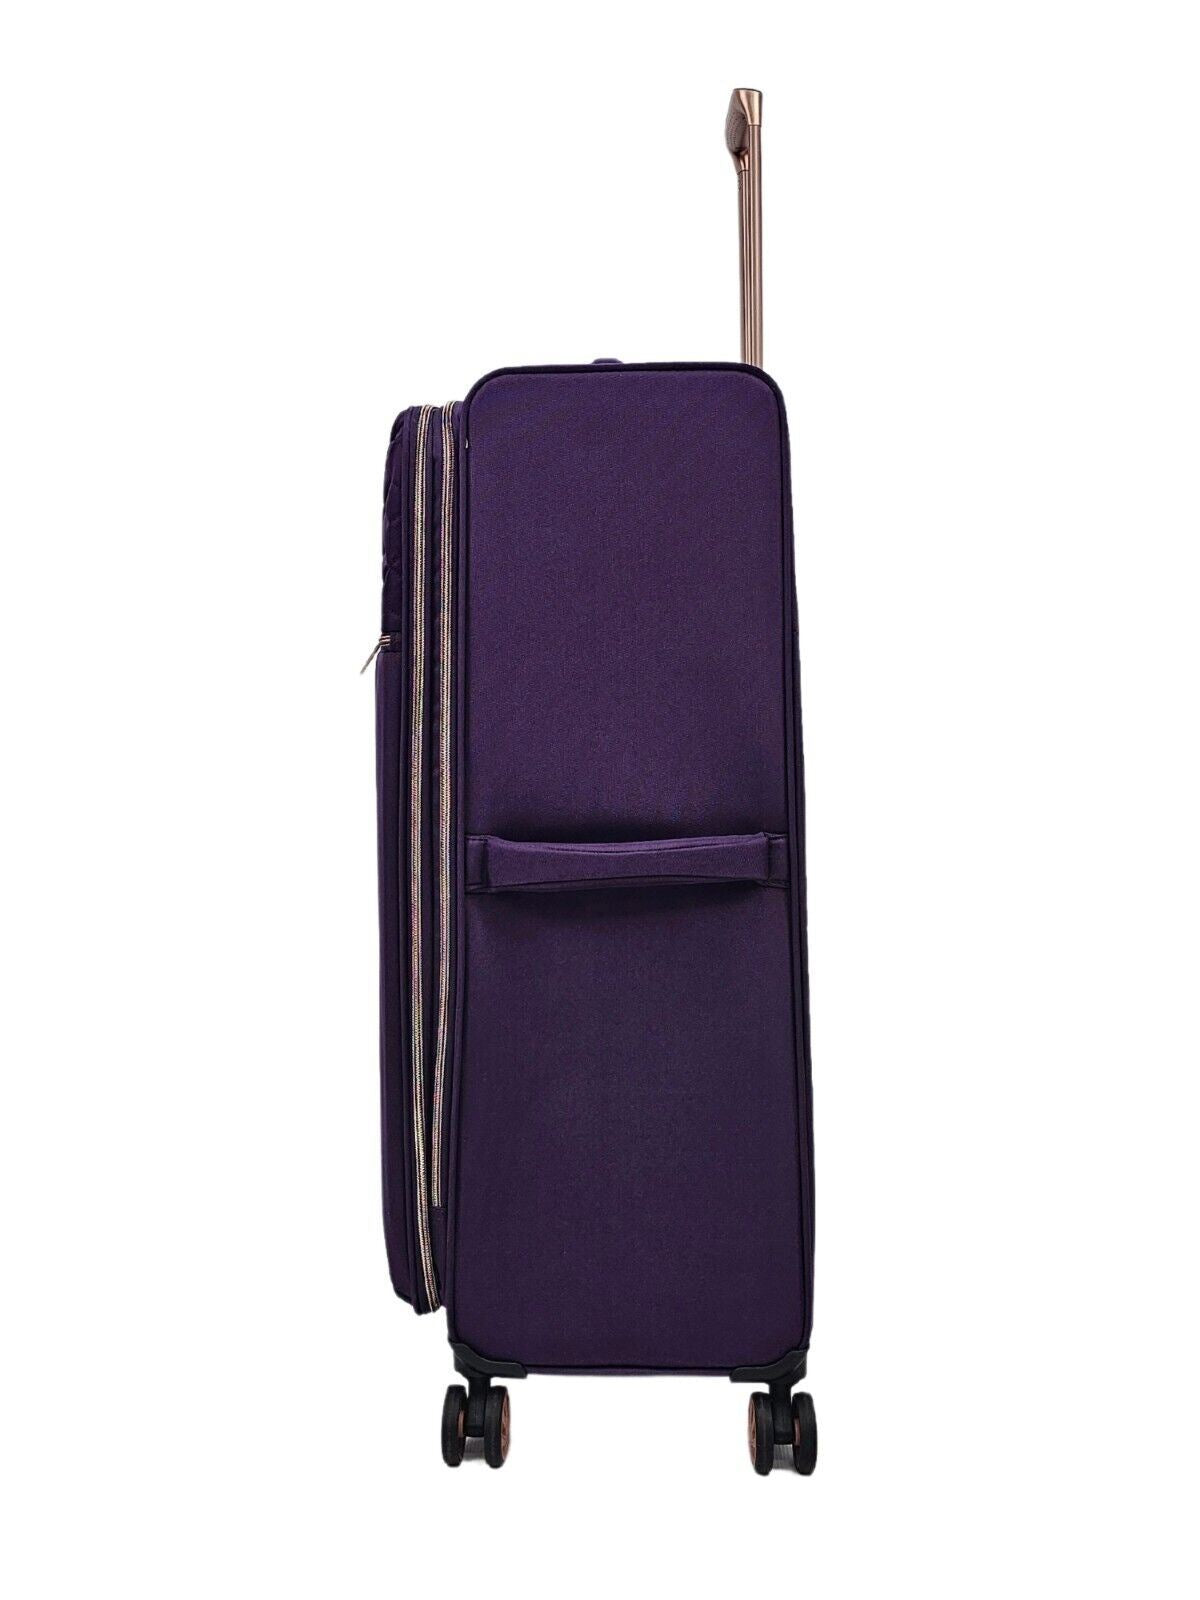 Cabin Purple Suitcases Set 4 Wheel Luggage Travel Lightweight Bags